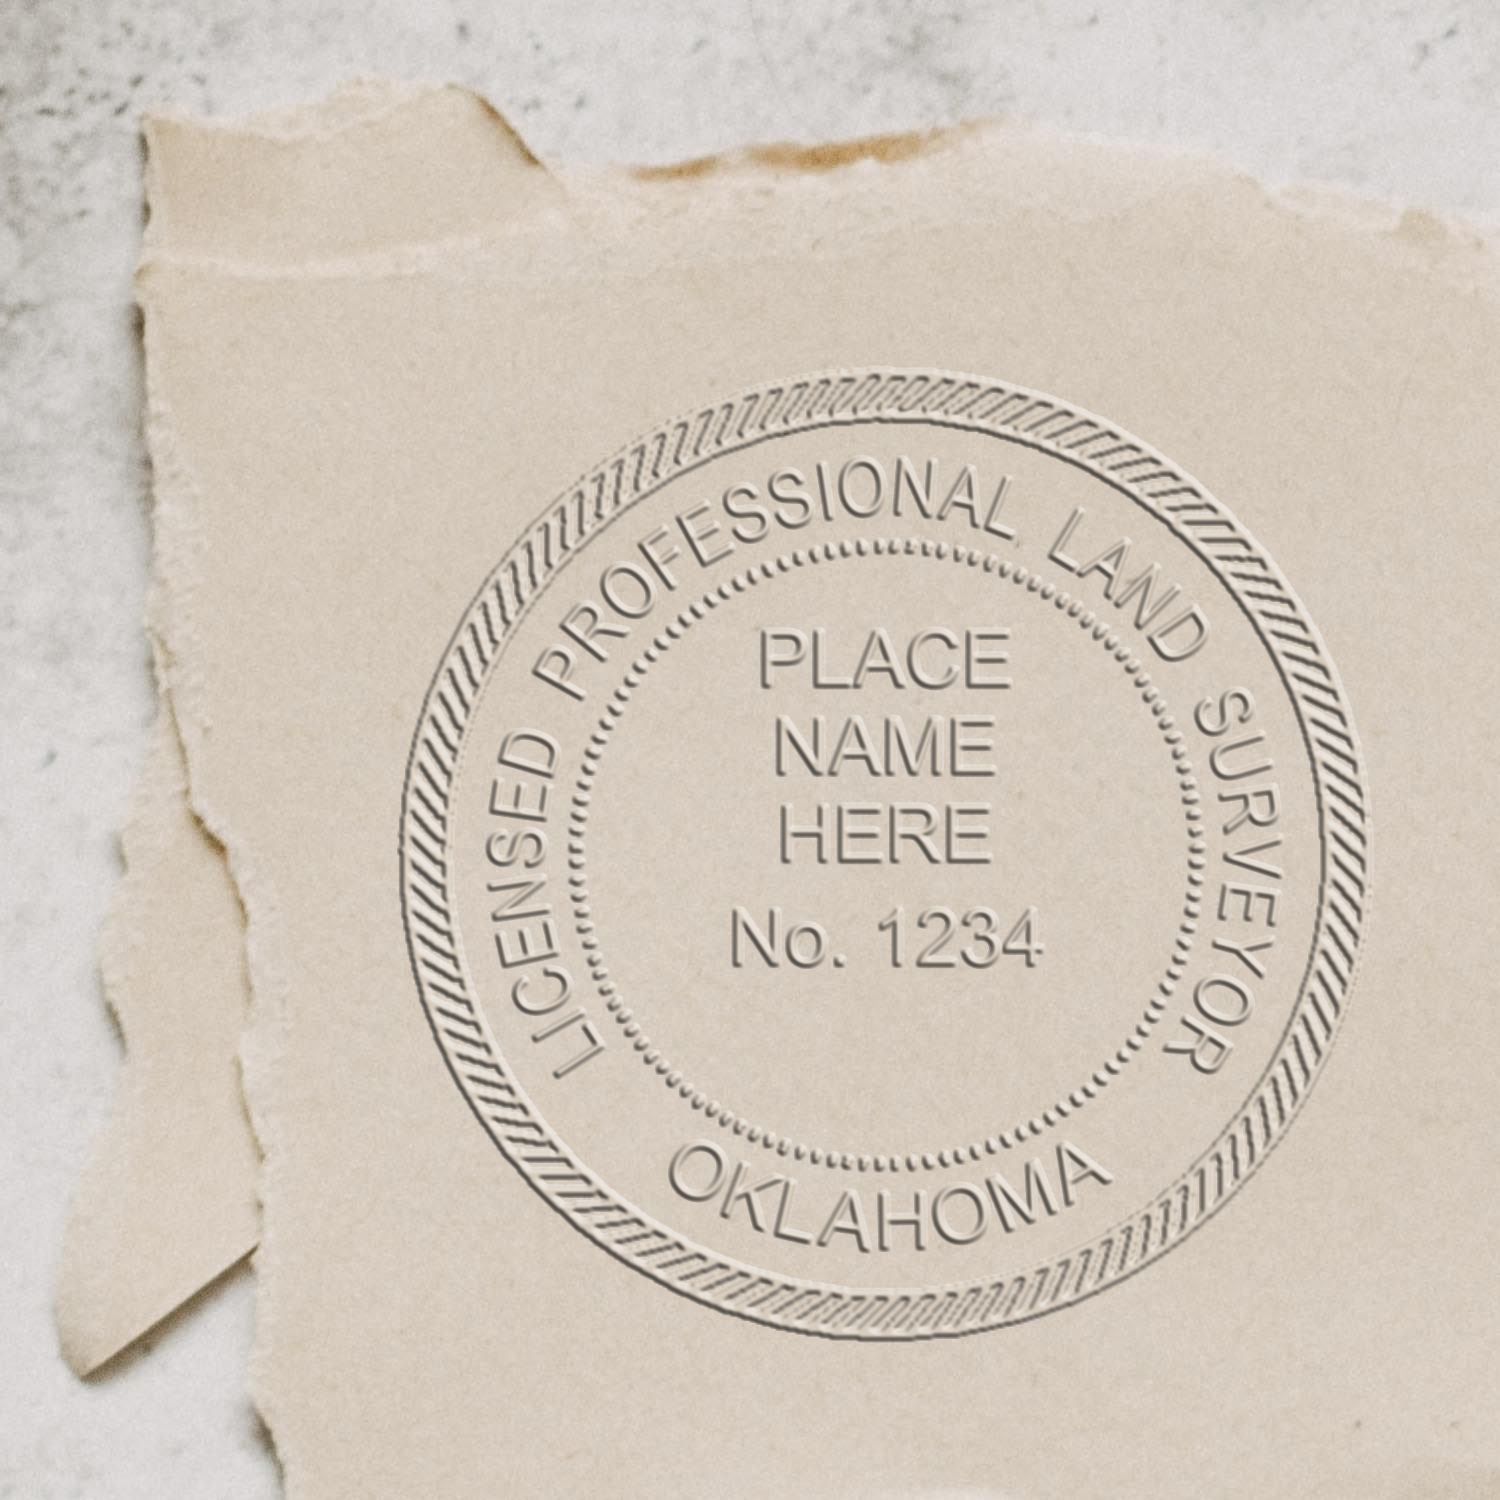 A stamped impression of the Handheld Oklahoma Land Surveyor Seal in this stylish lifestyle photo, setting the tone for a unique and personalized product.